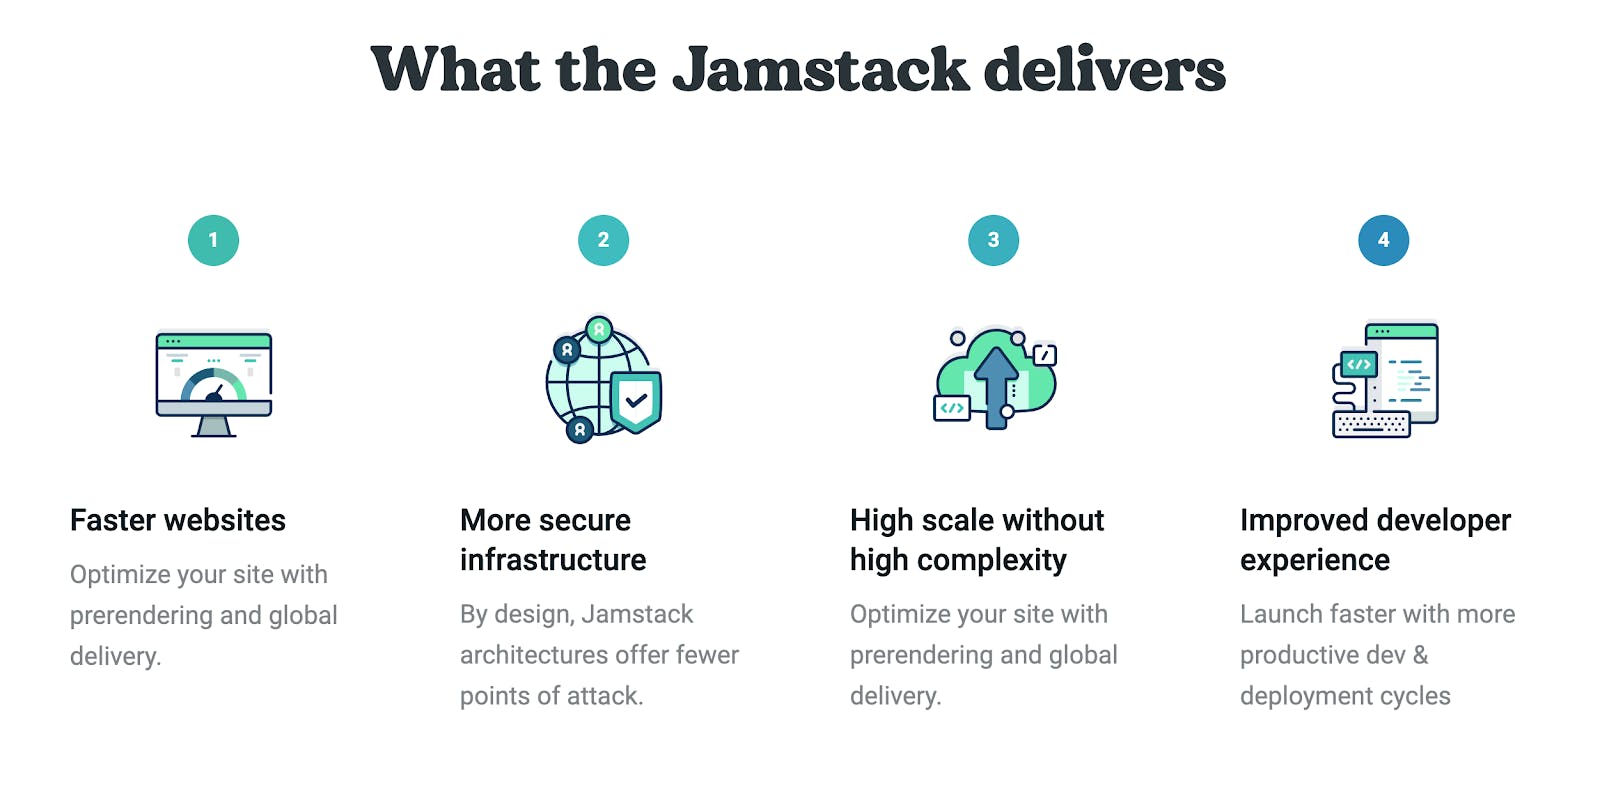 JAMstack Delivers Fater websites, More secure infrastructure, High scale without high complexity and Improved developer experience